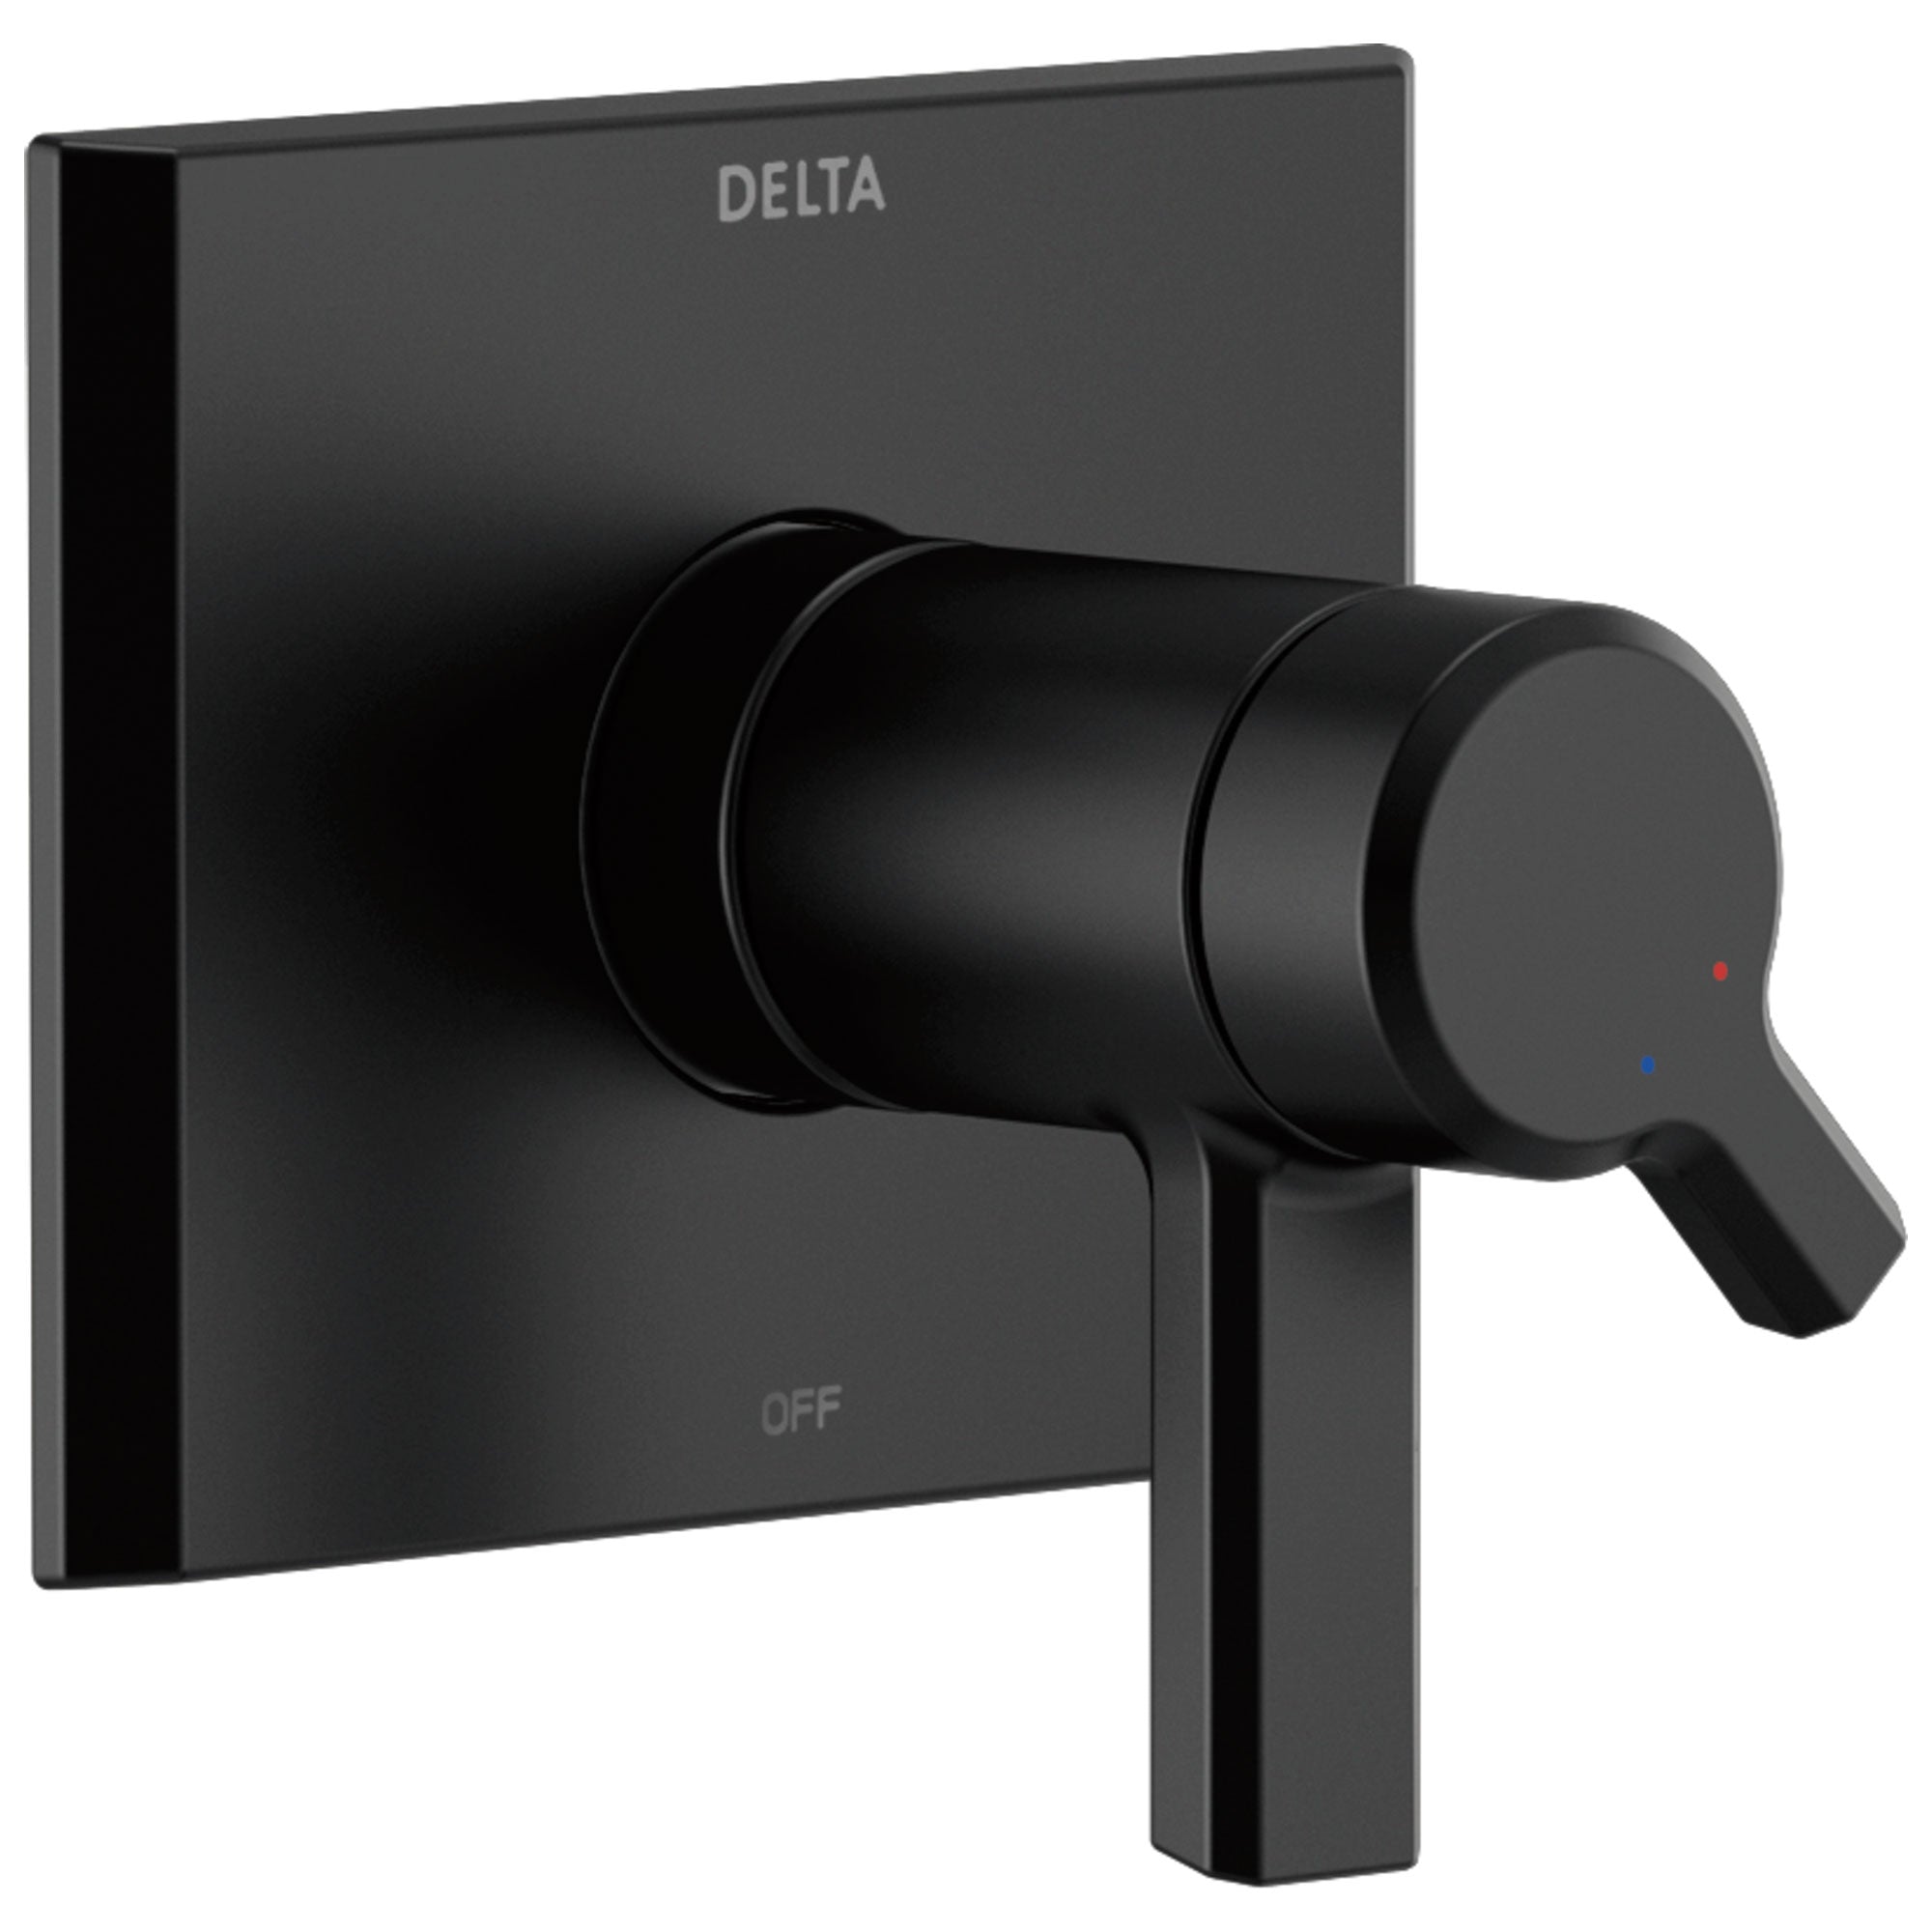 Delta Pivotal Matte Black Finish Thermostatic Shower Faucet Dual Handle Control Includes 17T Cartridge, Handles, and Valve without Stops D3305V